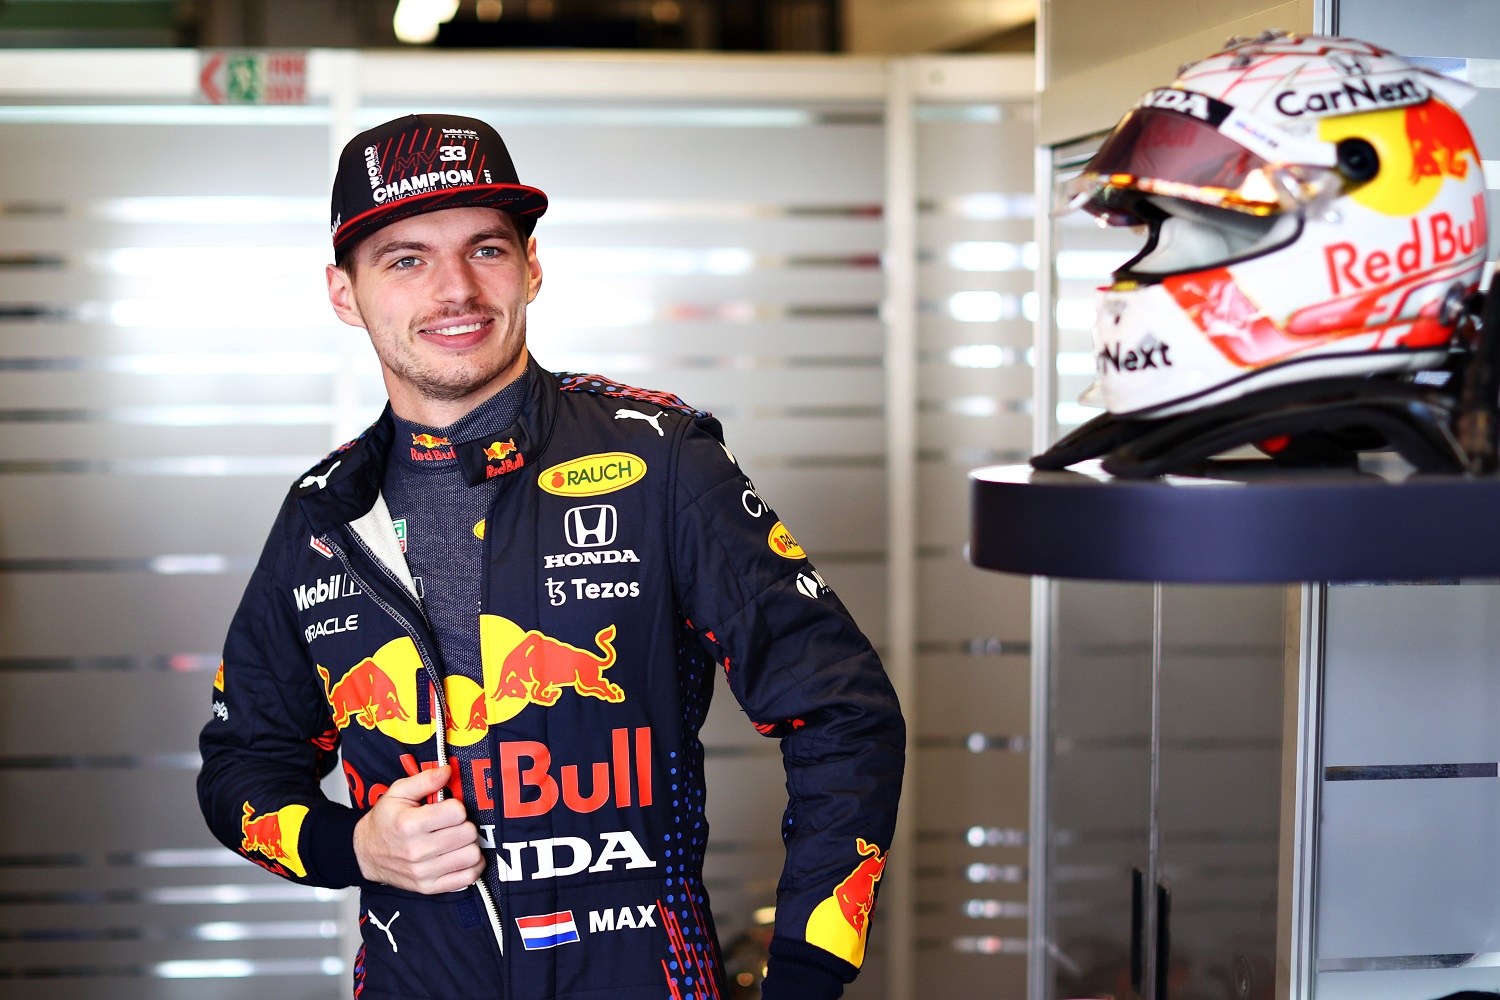 Max Verstappen of Red Bull Racing prepares in the garage during Formula 1 testing at Yas Marina Circuit on Dec. 14, 2021, in Abu Dhabi, United Arab Emirates. | Clive Rose/Getty Images